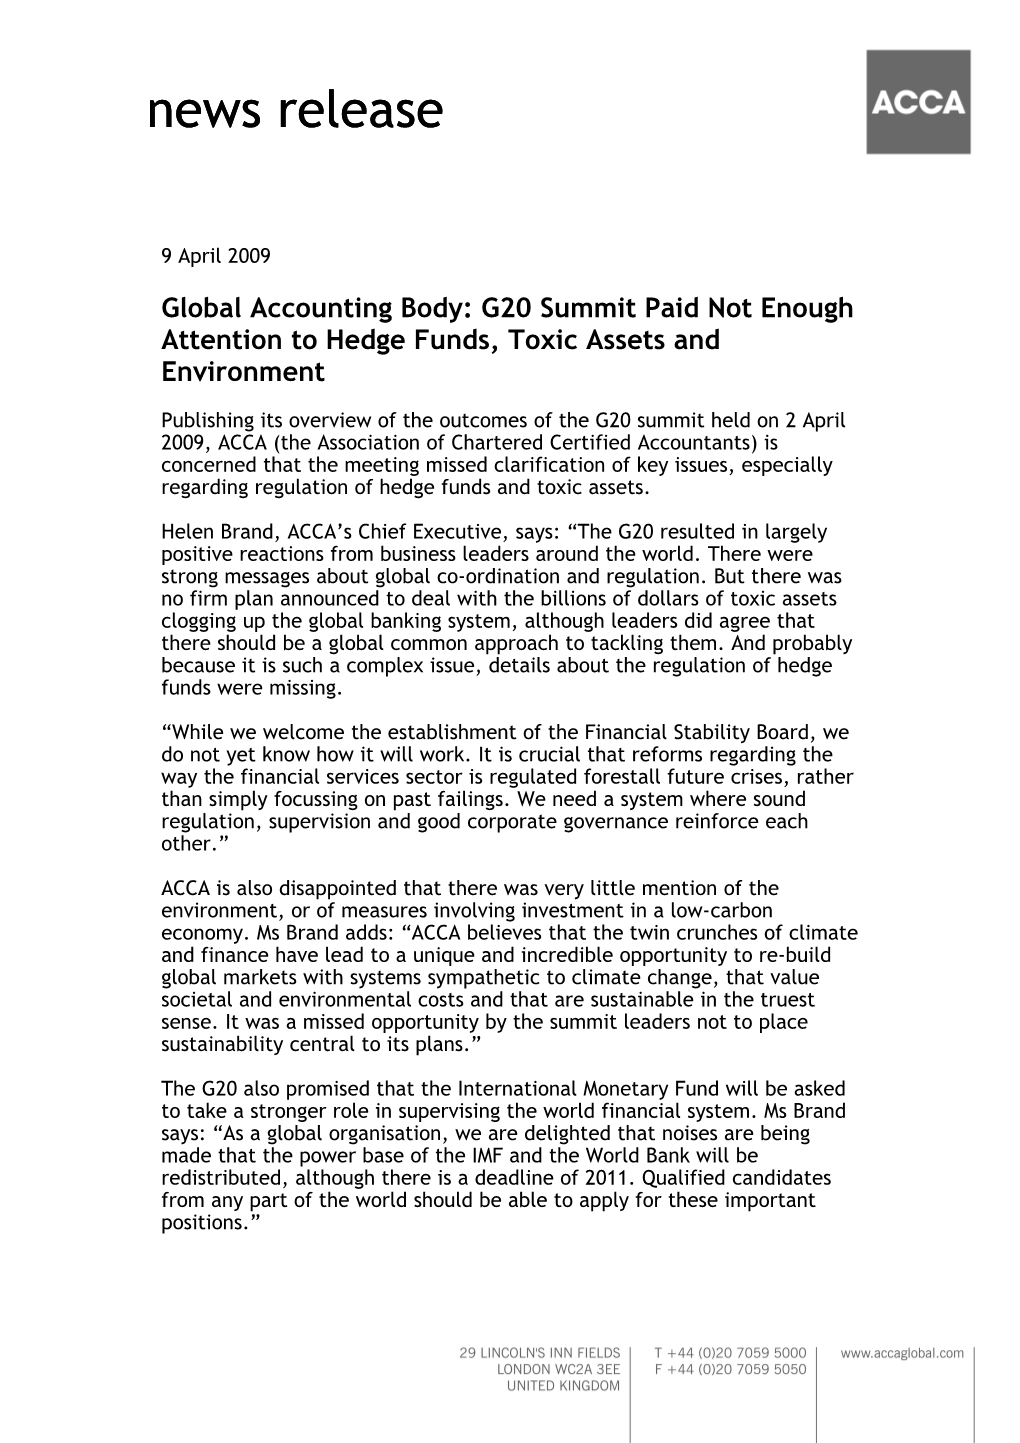 Global Accounting Body: G20 Summit Paid Not Enough Attention to Hedge Funds, Toxic Assets